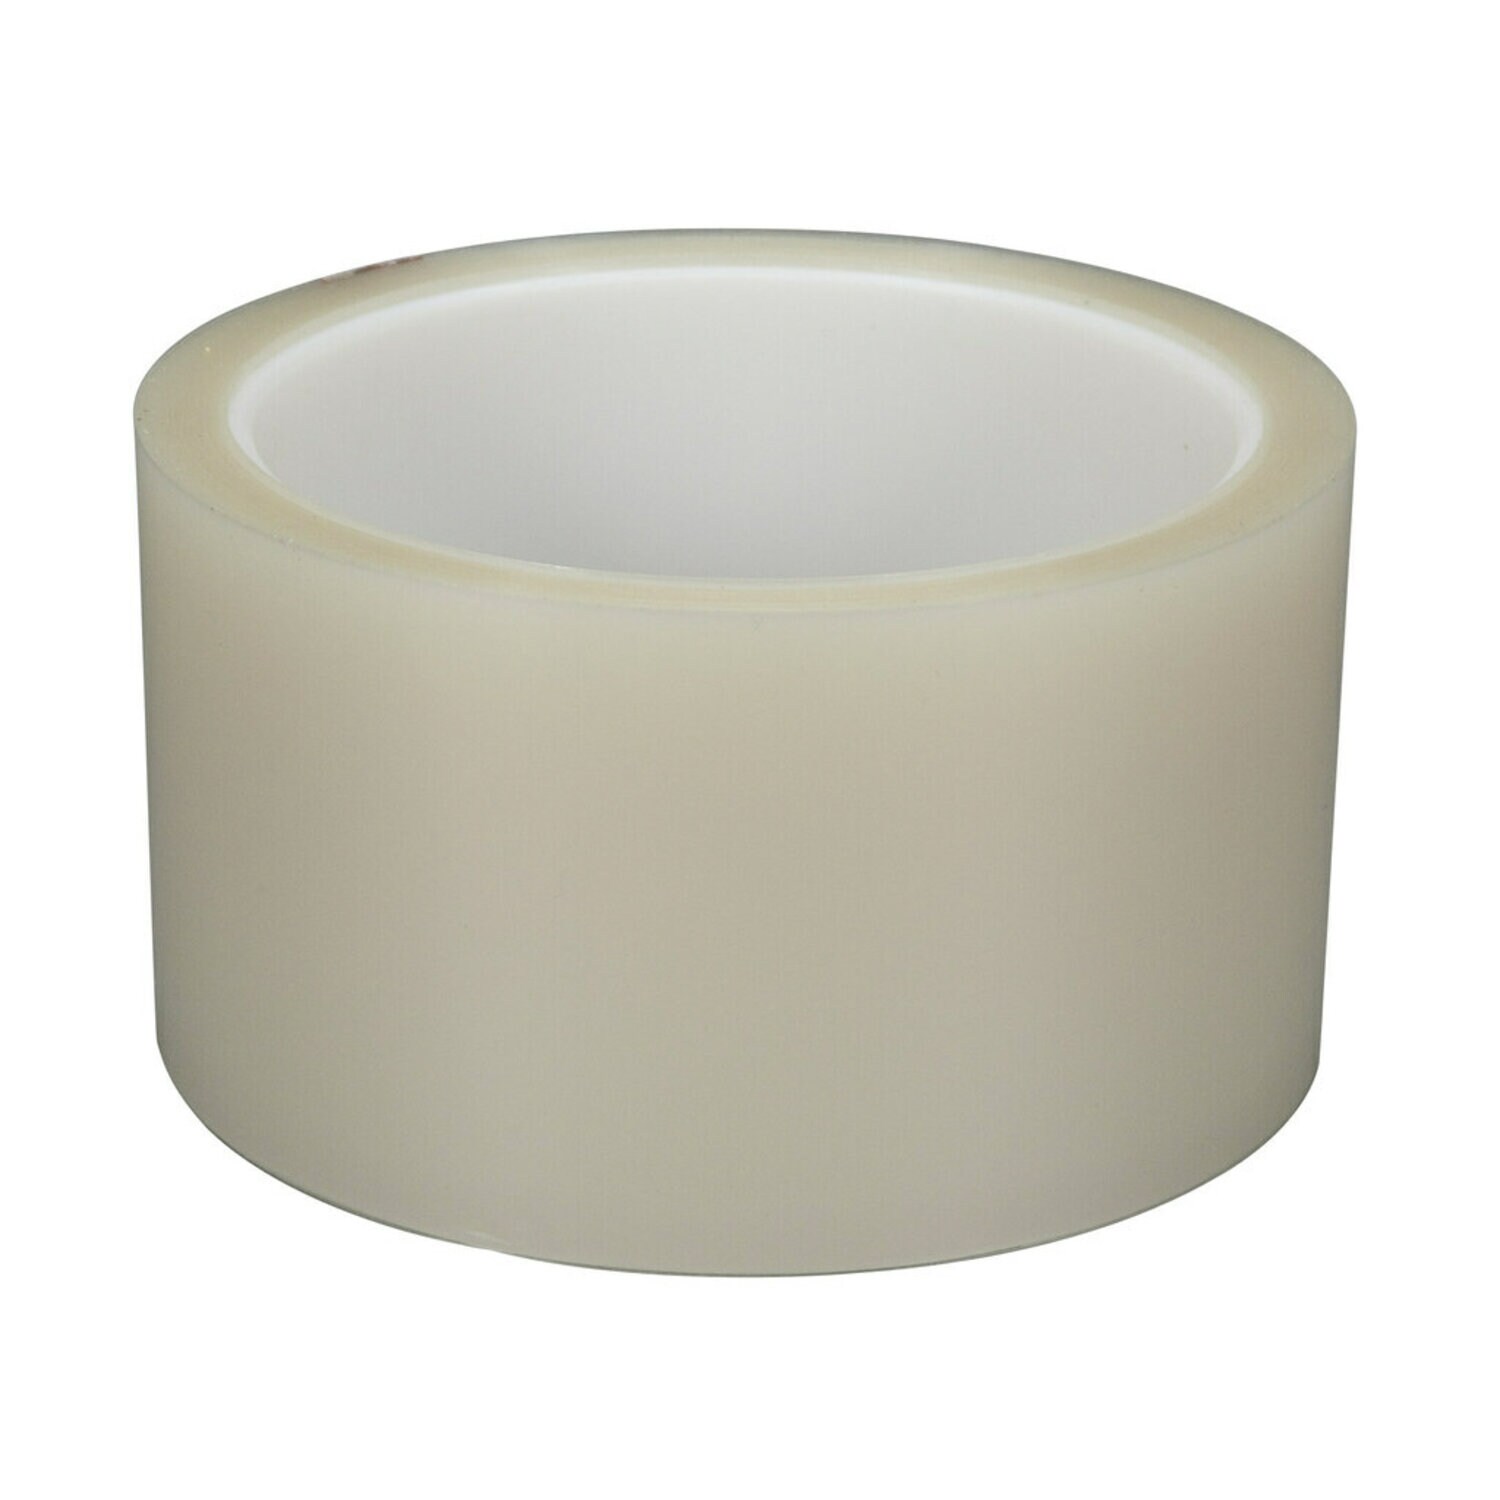 7010048692 - 3M Polyester Film Tape 853, Transparent, 8 in x 72 yd, 2.2 mil, 4
Roll/Case